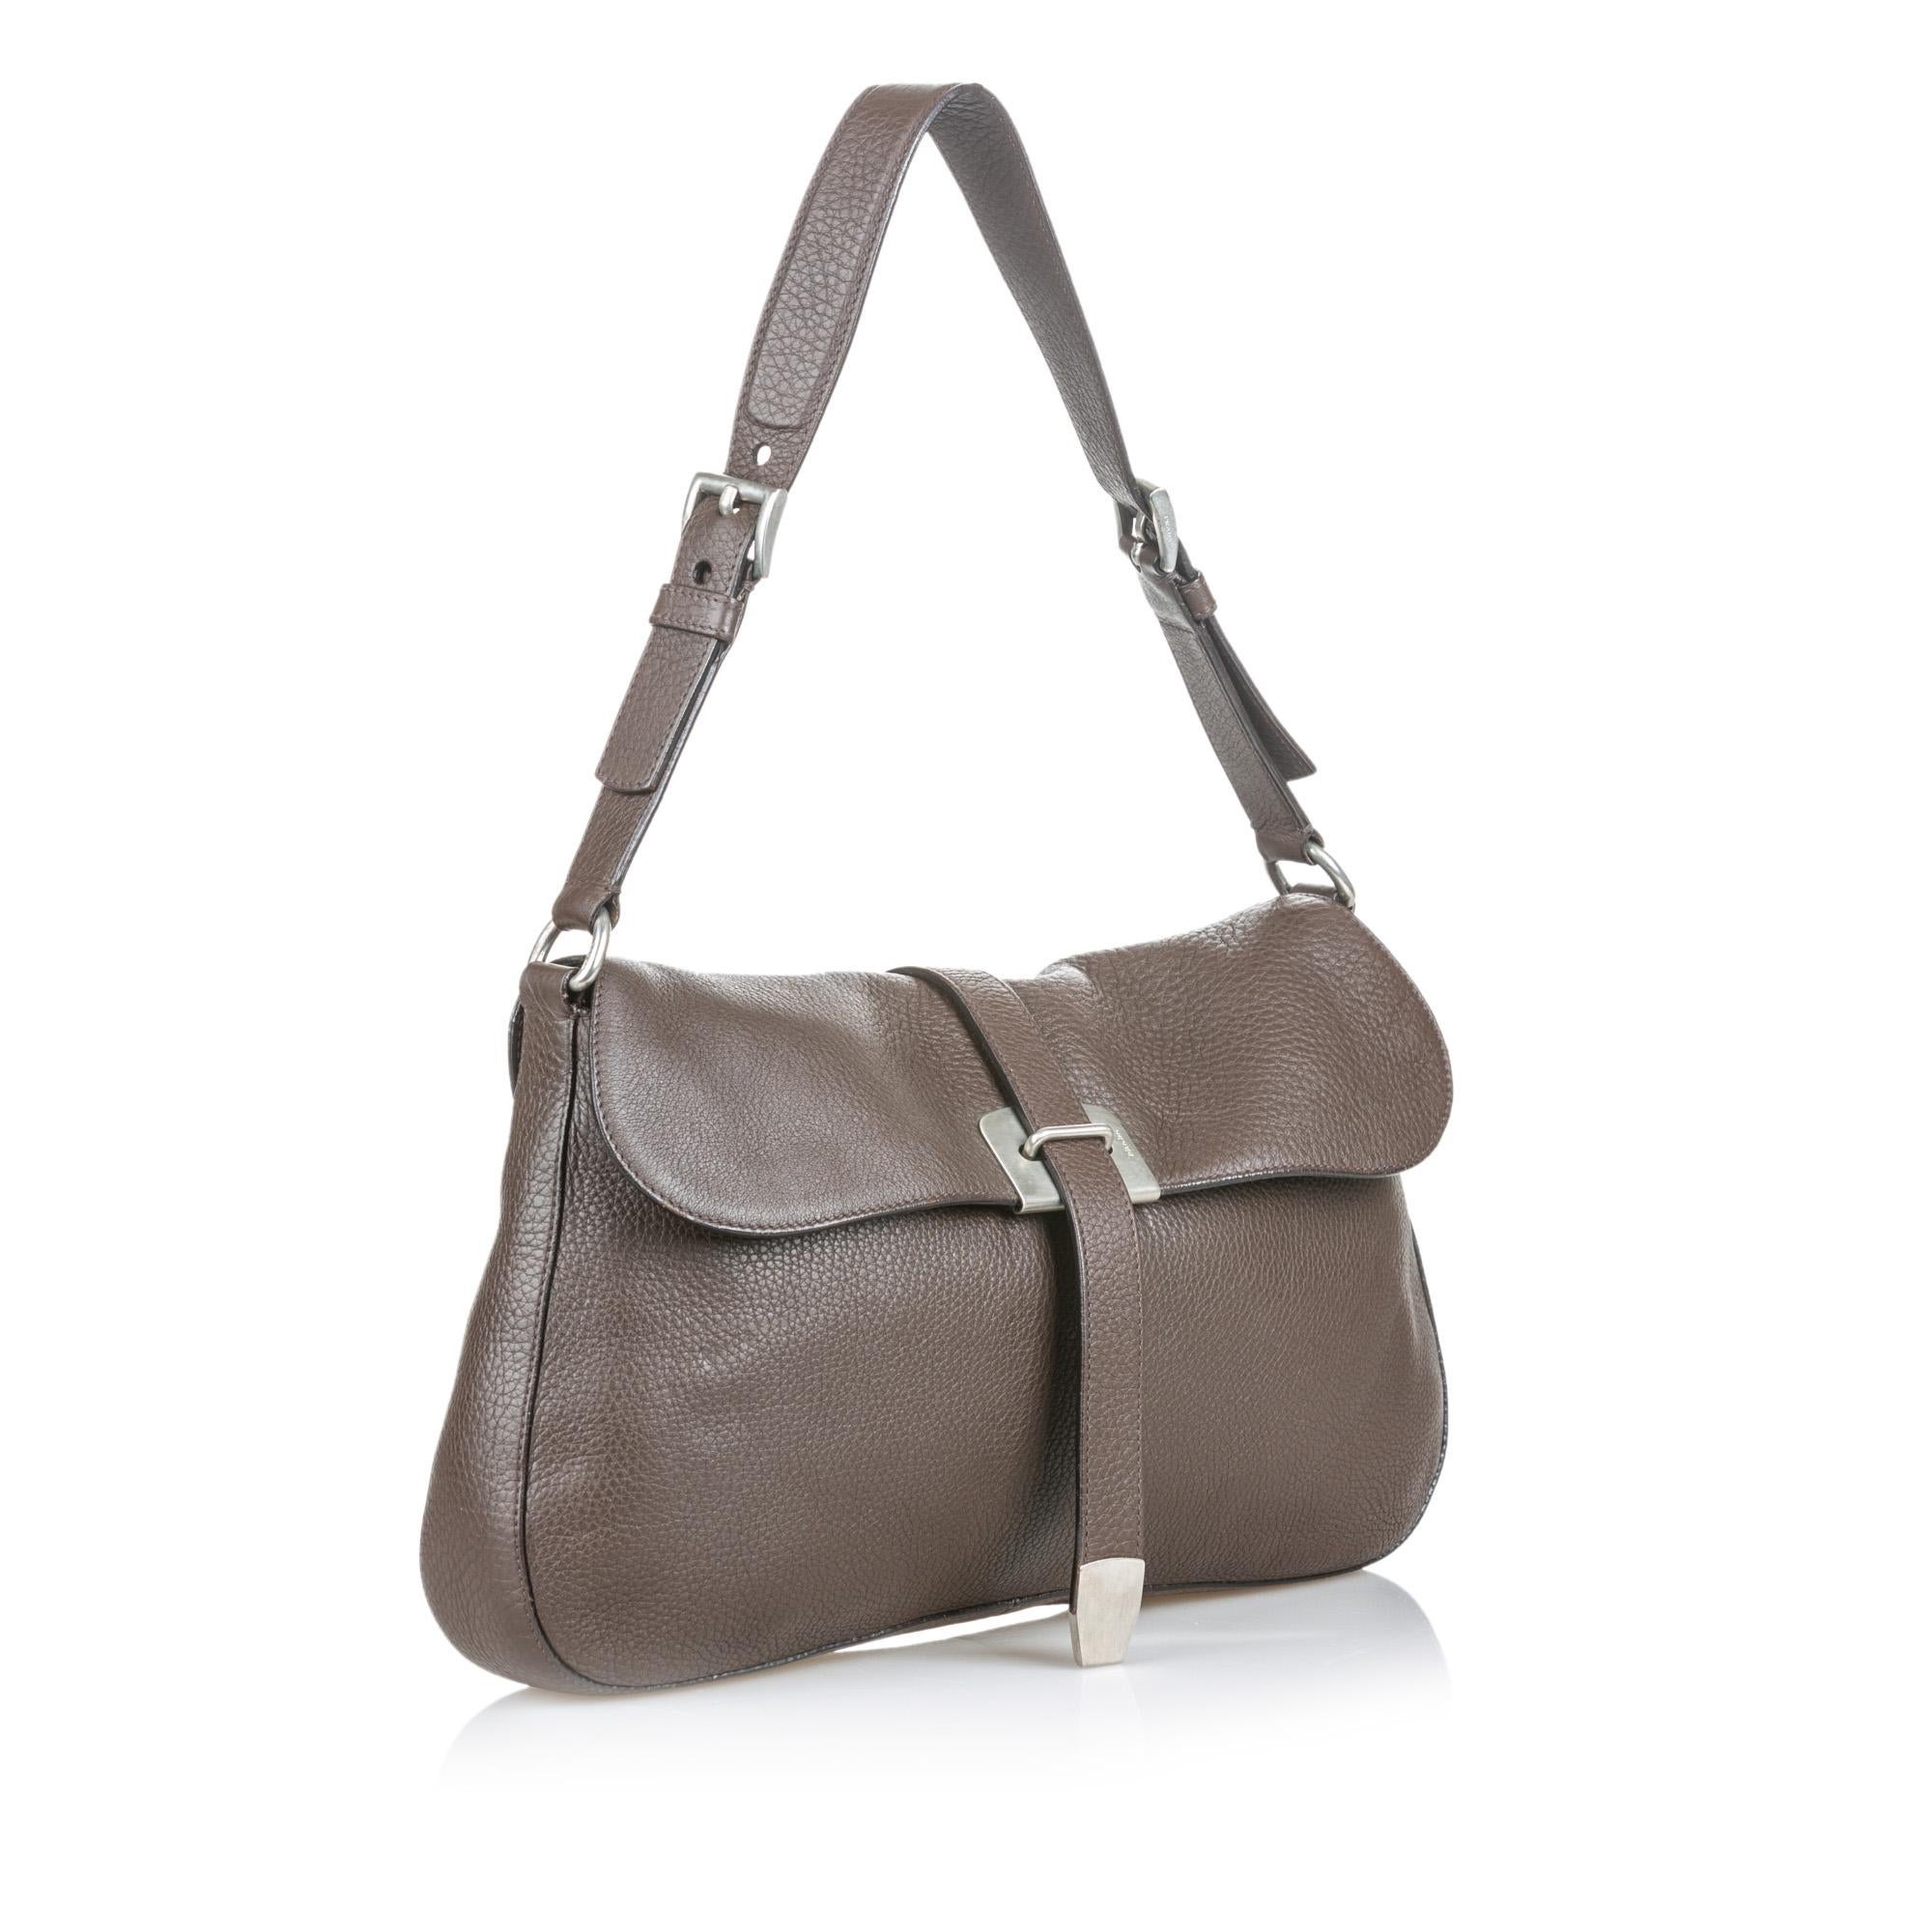 This shoulder bag features a leather body, a flat leather strap, a top flap with a flat strap and pull through closure, and an interior zip pocket. It carries as B+ condition rating.

Inclusions: 
Dust Bag
Authenticity Card
Dimensions:
Length: 28.00